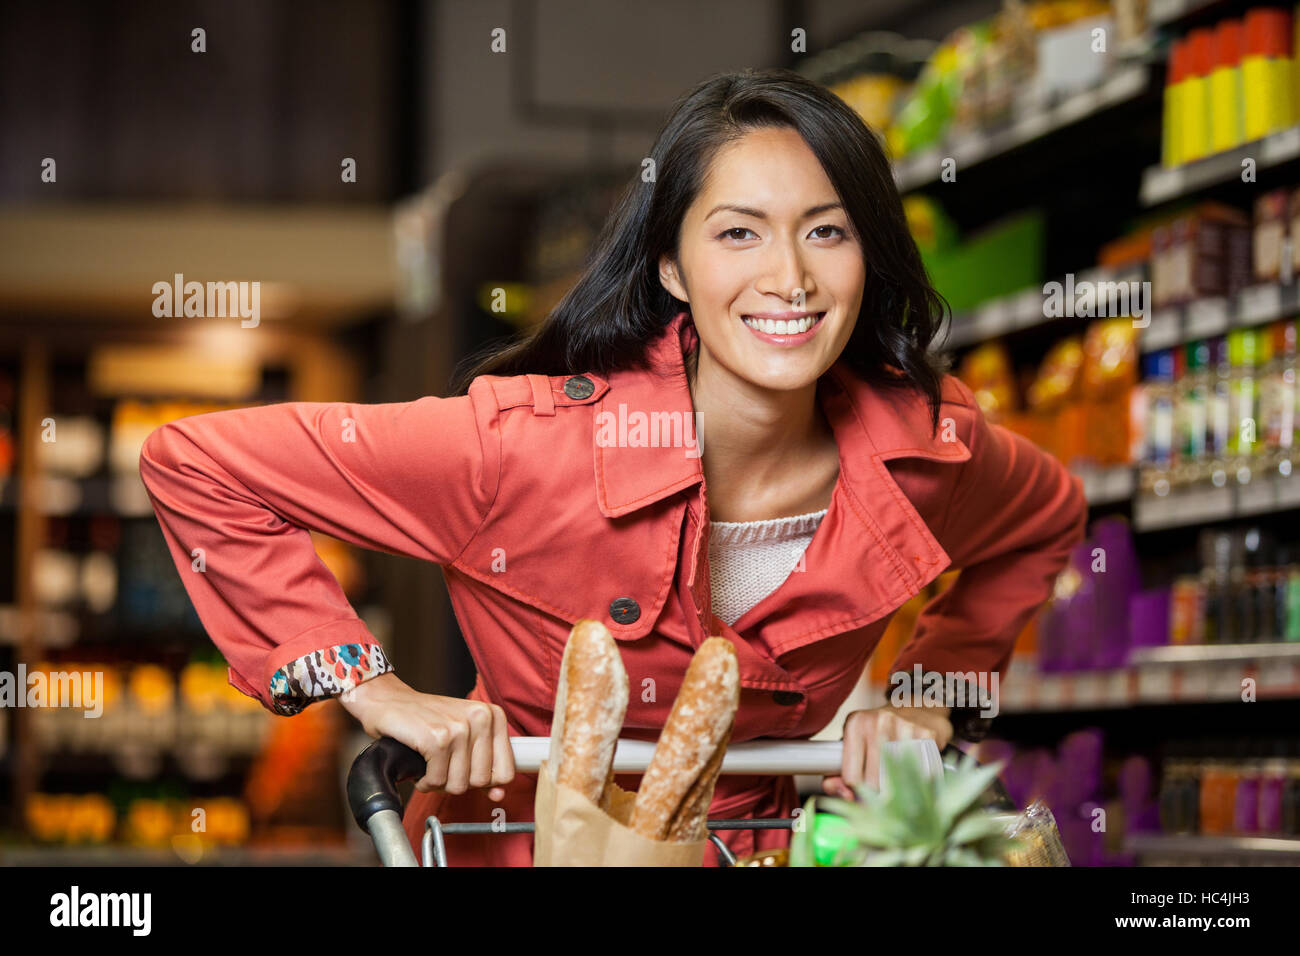 Woman holding shopping cart in organic section Stock Photo